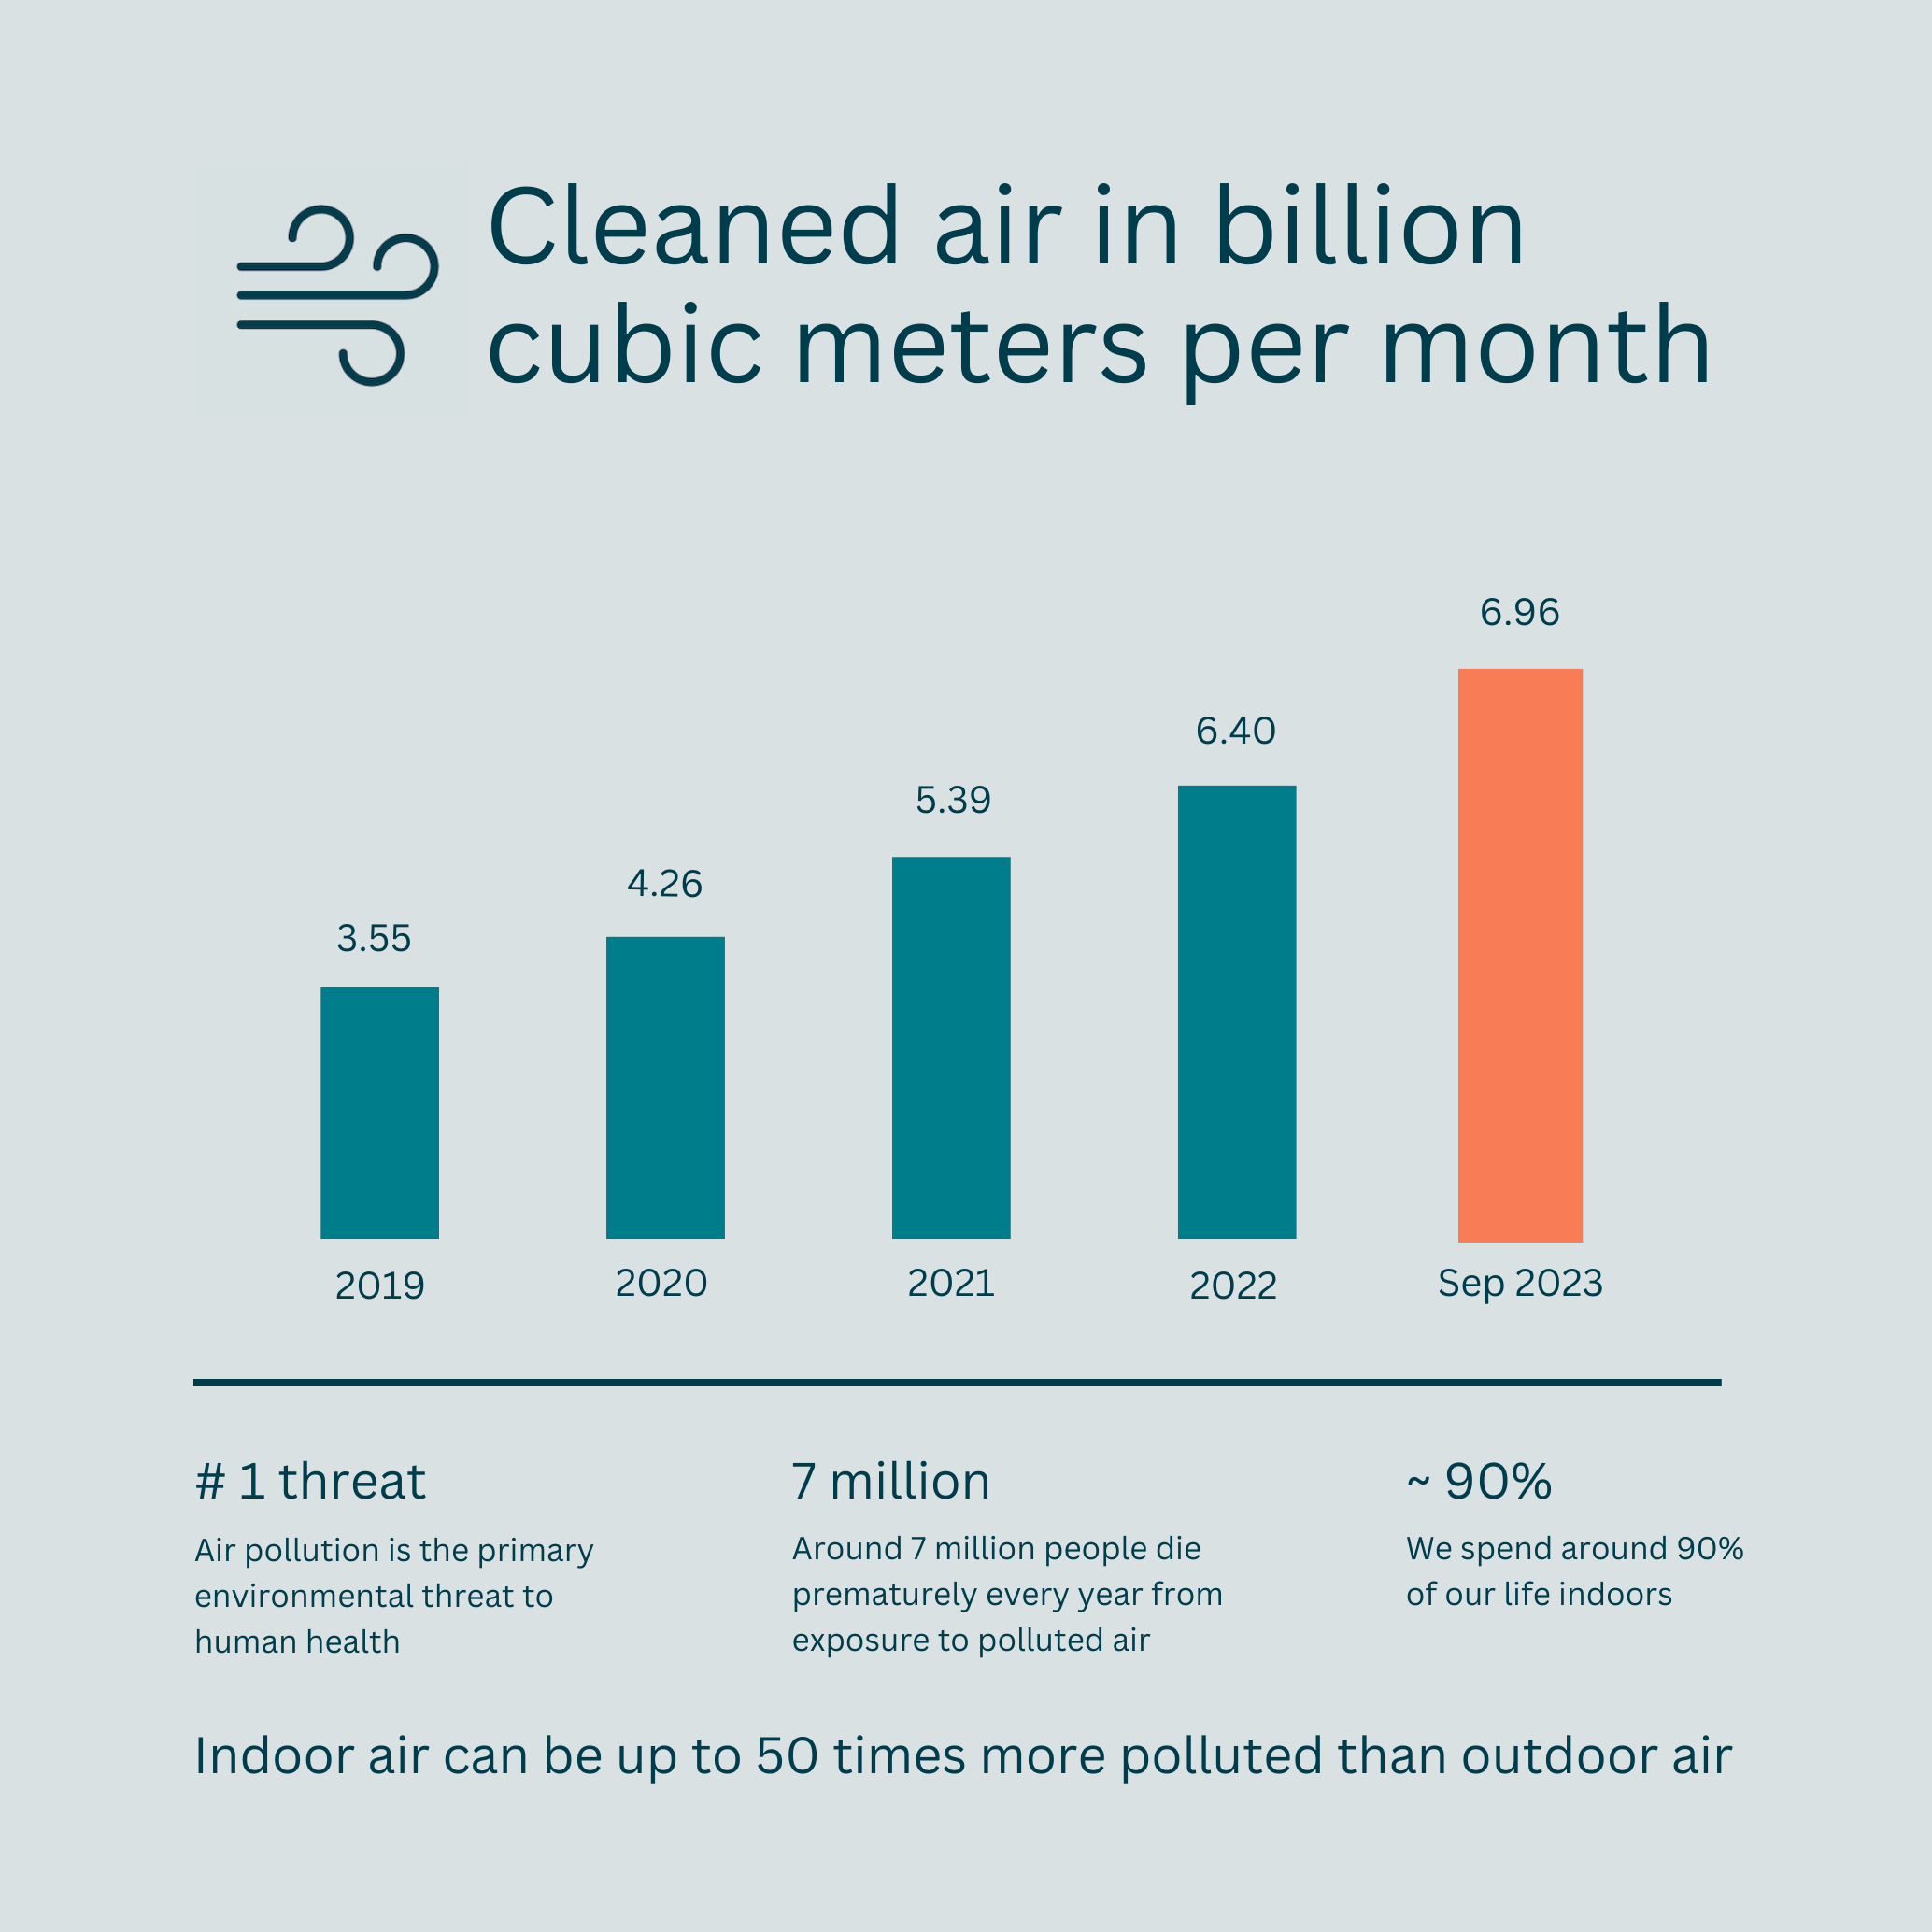 Clean air delivered in latest quarter